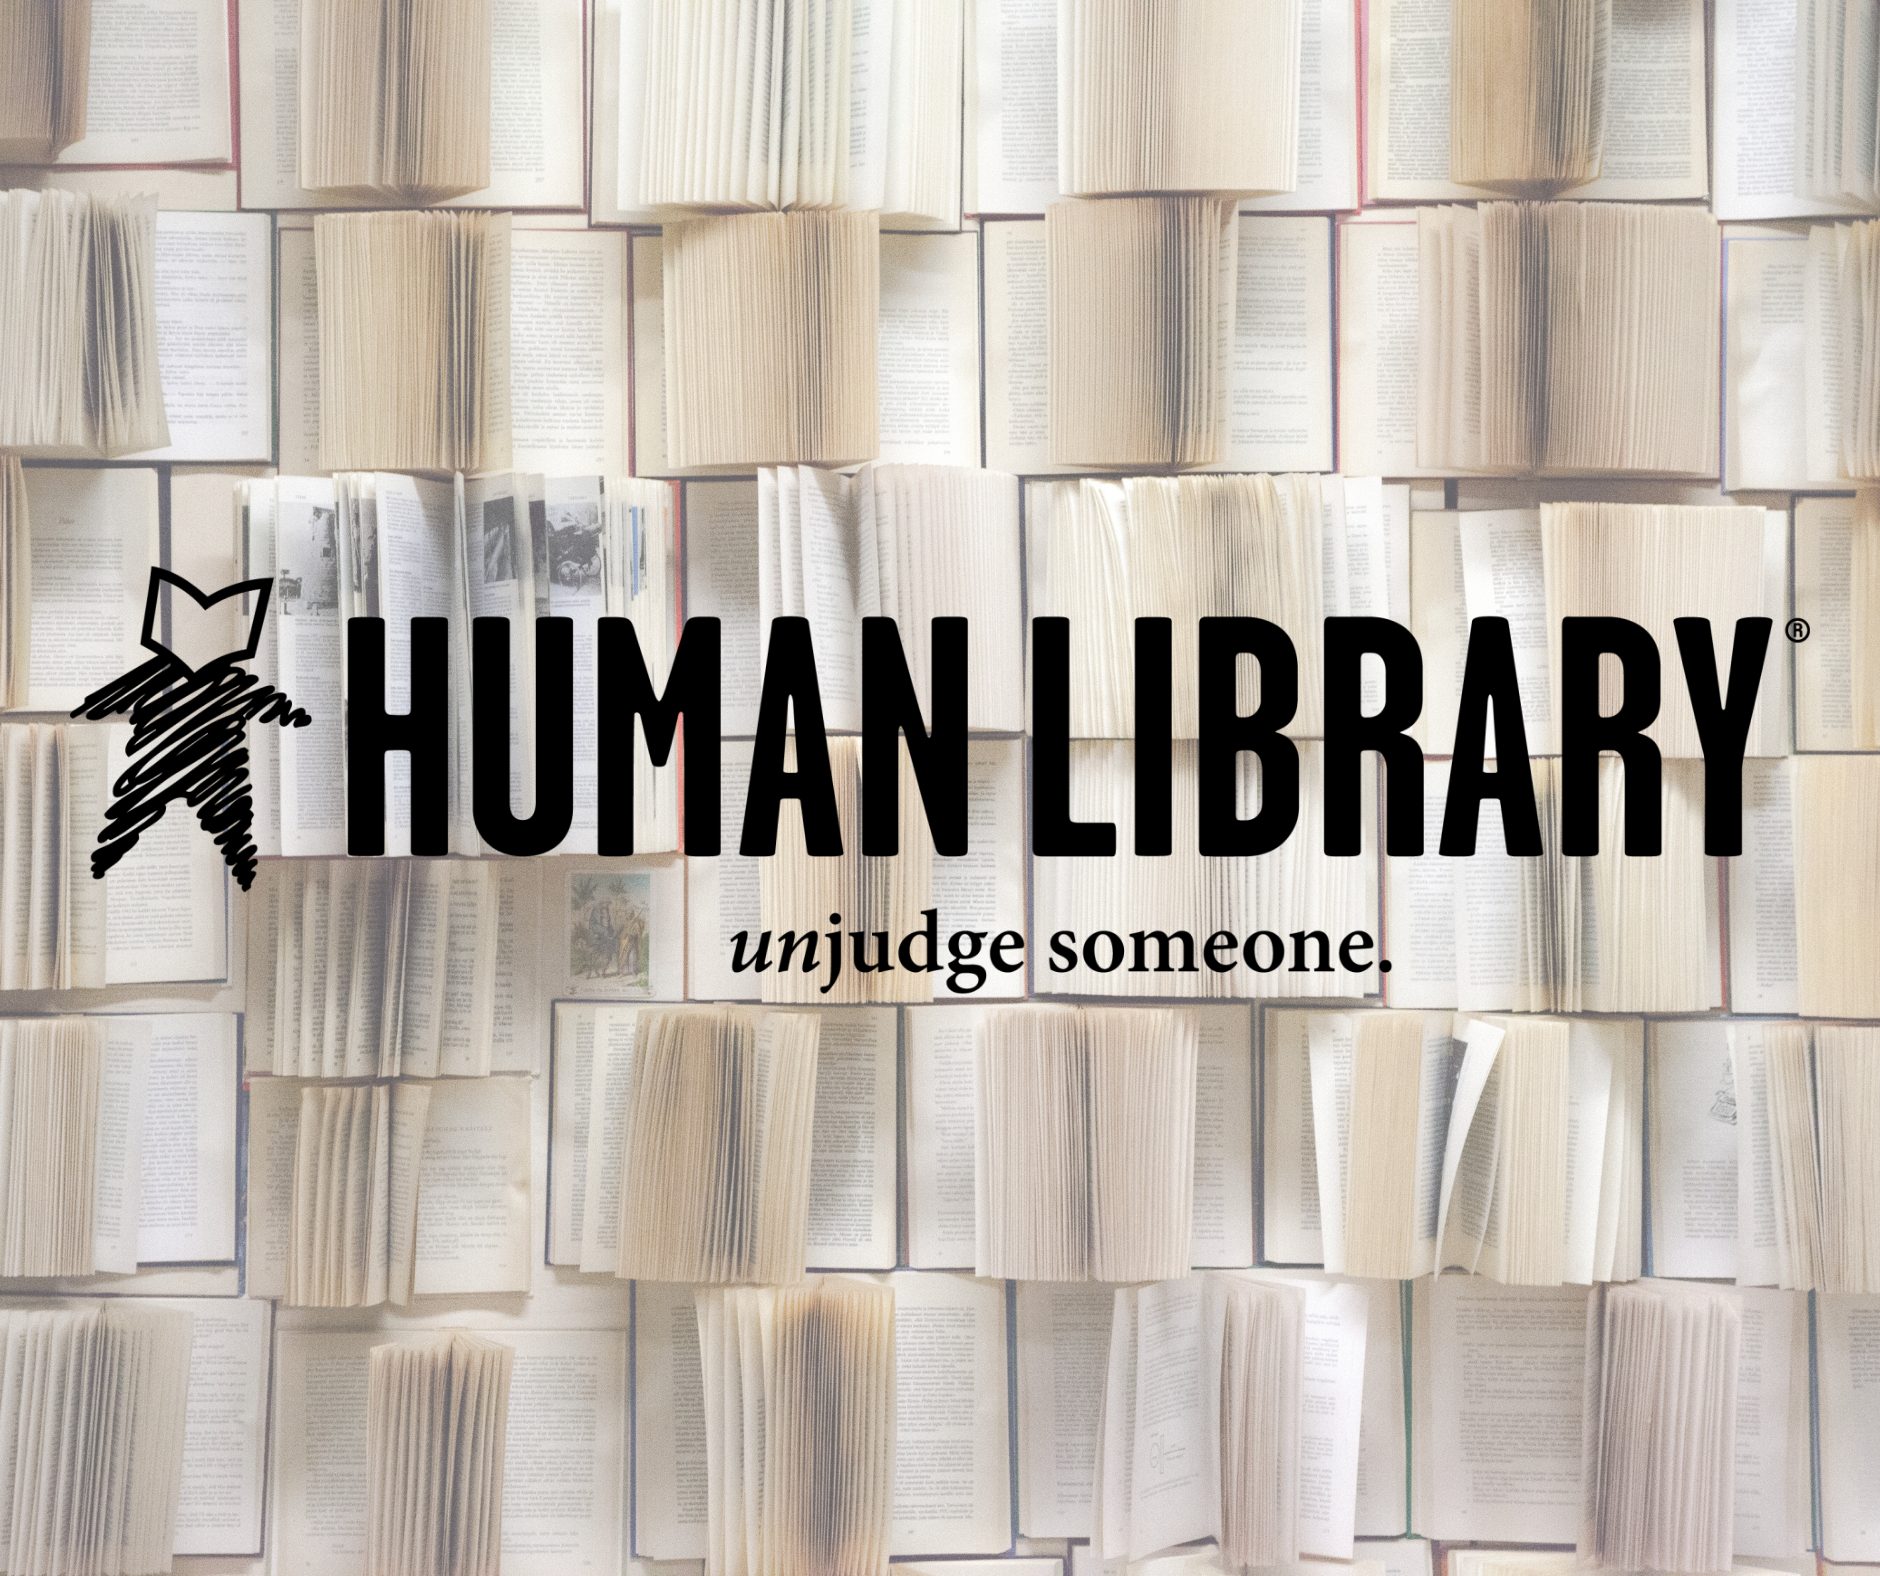 Human library logo over book page background